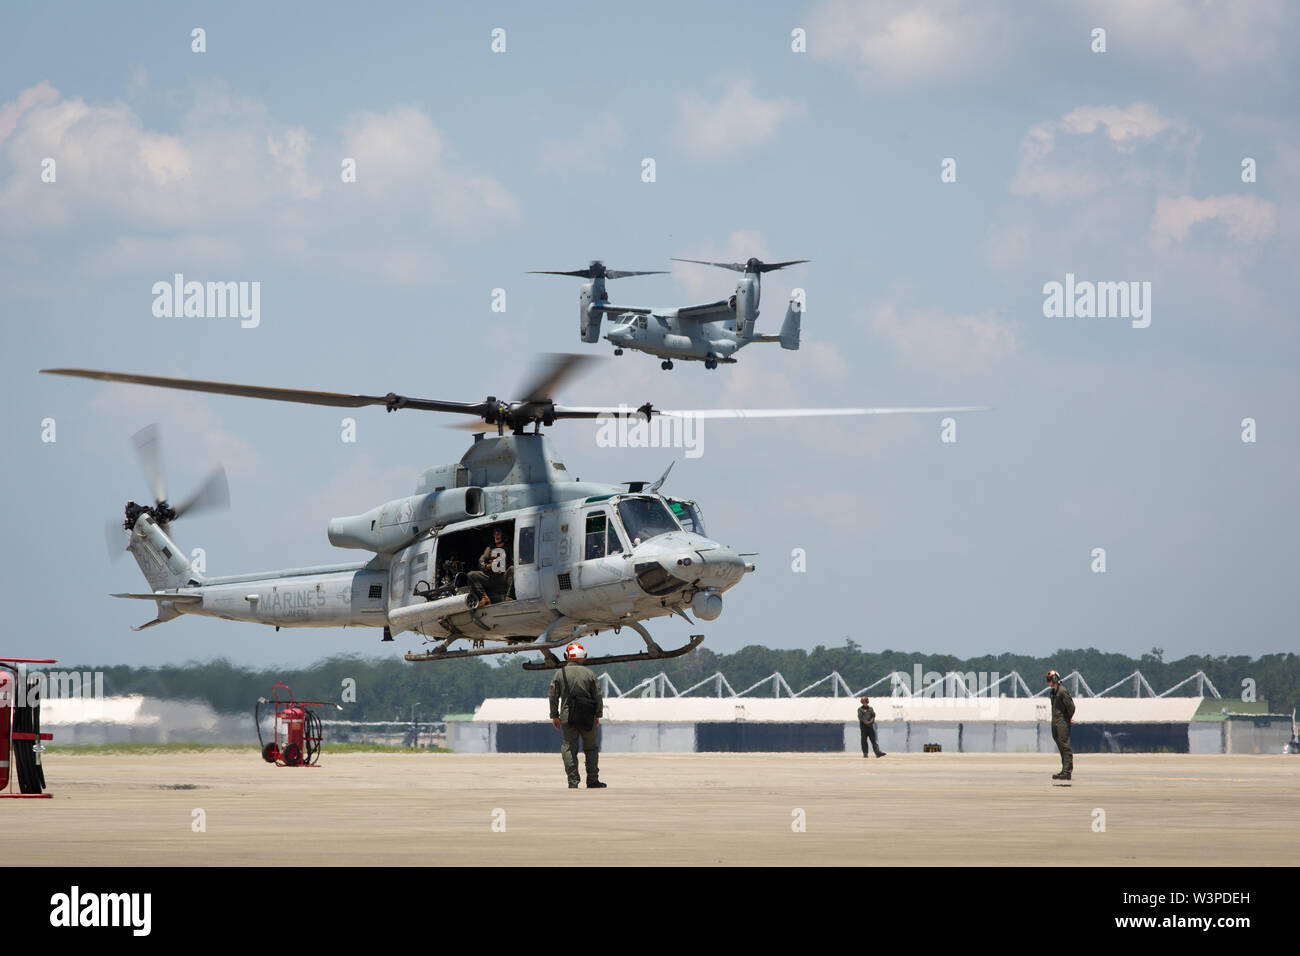 A U.S. Marine Corps UH-1Y Huey and MV-22 Osprey assigned to Marine Medium Tiltrotor Squadron (VMM) 264 prepare for landing during a homecoming reception at Marine Corps Air Station New River, North Carolina, July 14, 2019. Marines and Sailors with VMM-264 returned from a deployment with the 22nd Marine Expeditionary Unit. (U.S. Marine Corps photo by Cpl. Cody Rowe) Stock Photo